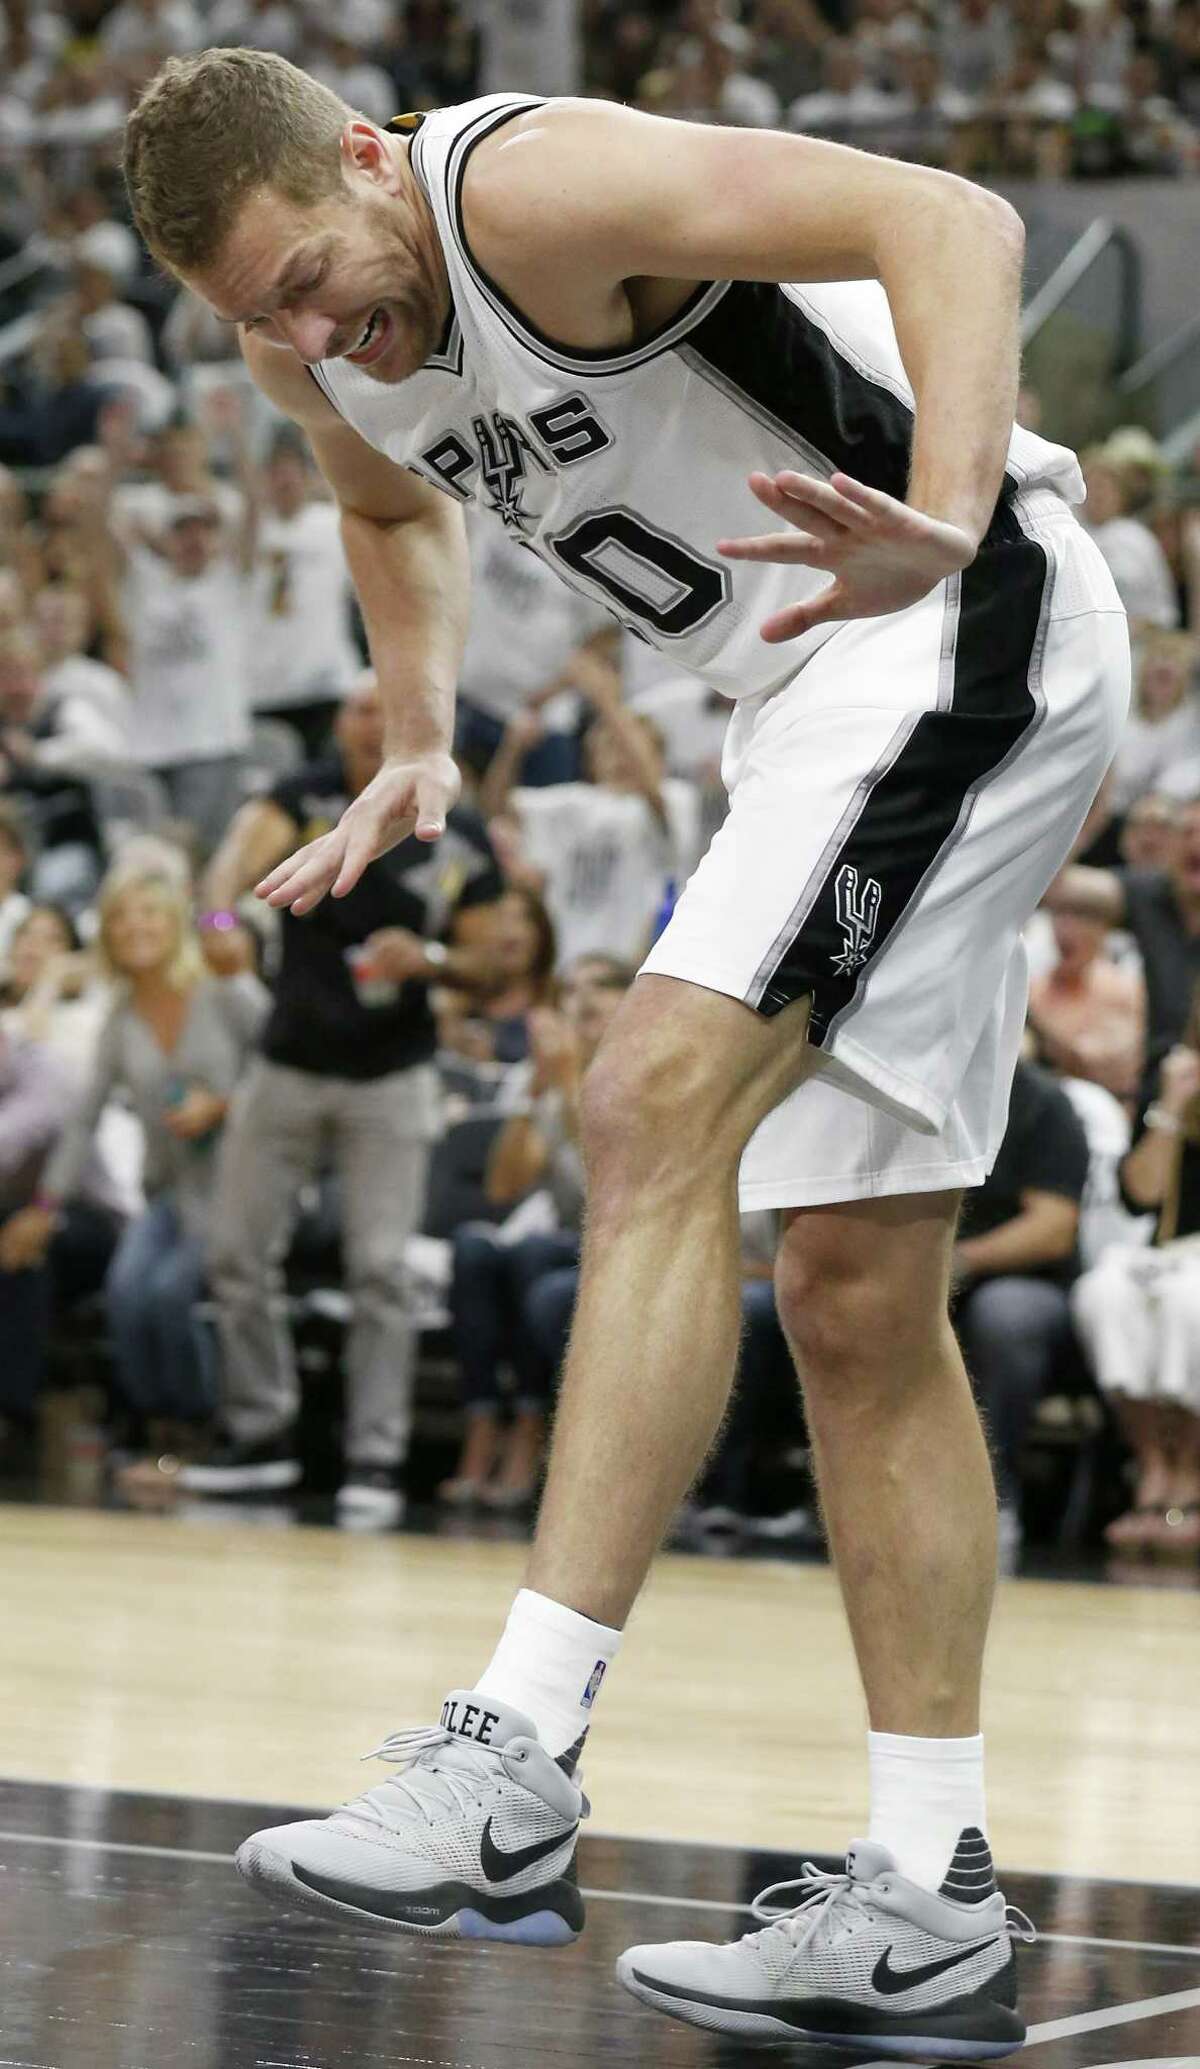 Spurs’ David Lee reacts after injuring his knee on a play during first half action in Game 3 of the Western Conference finals against the Golden State Warriors on May 20, 2017 at the AT&T Center.